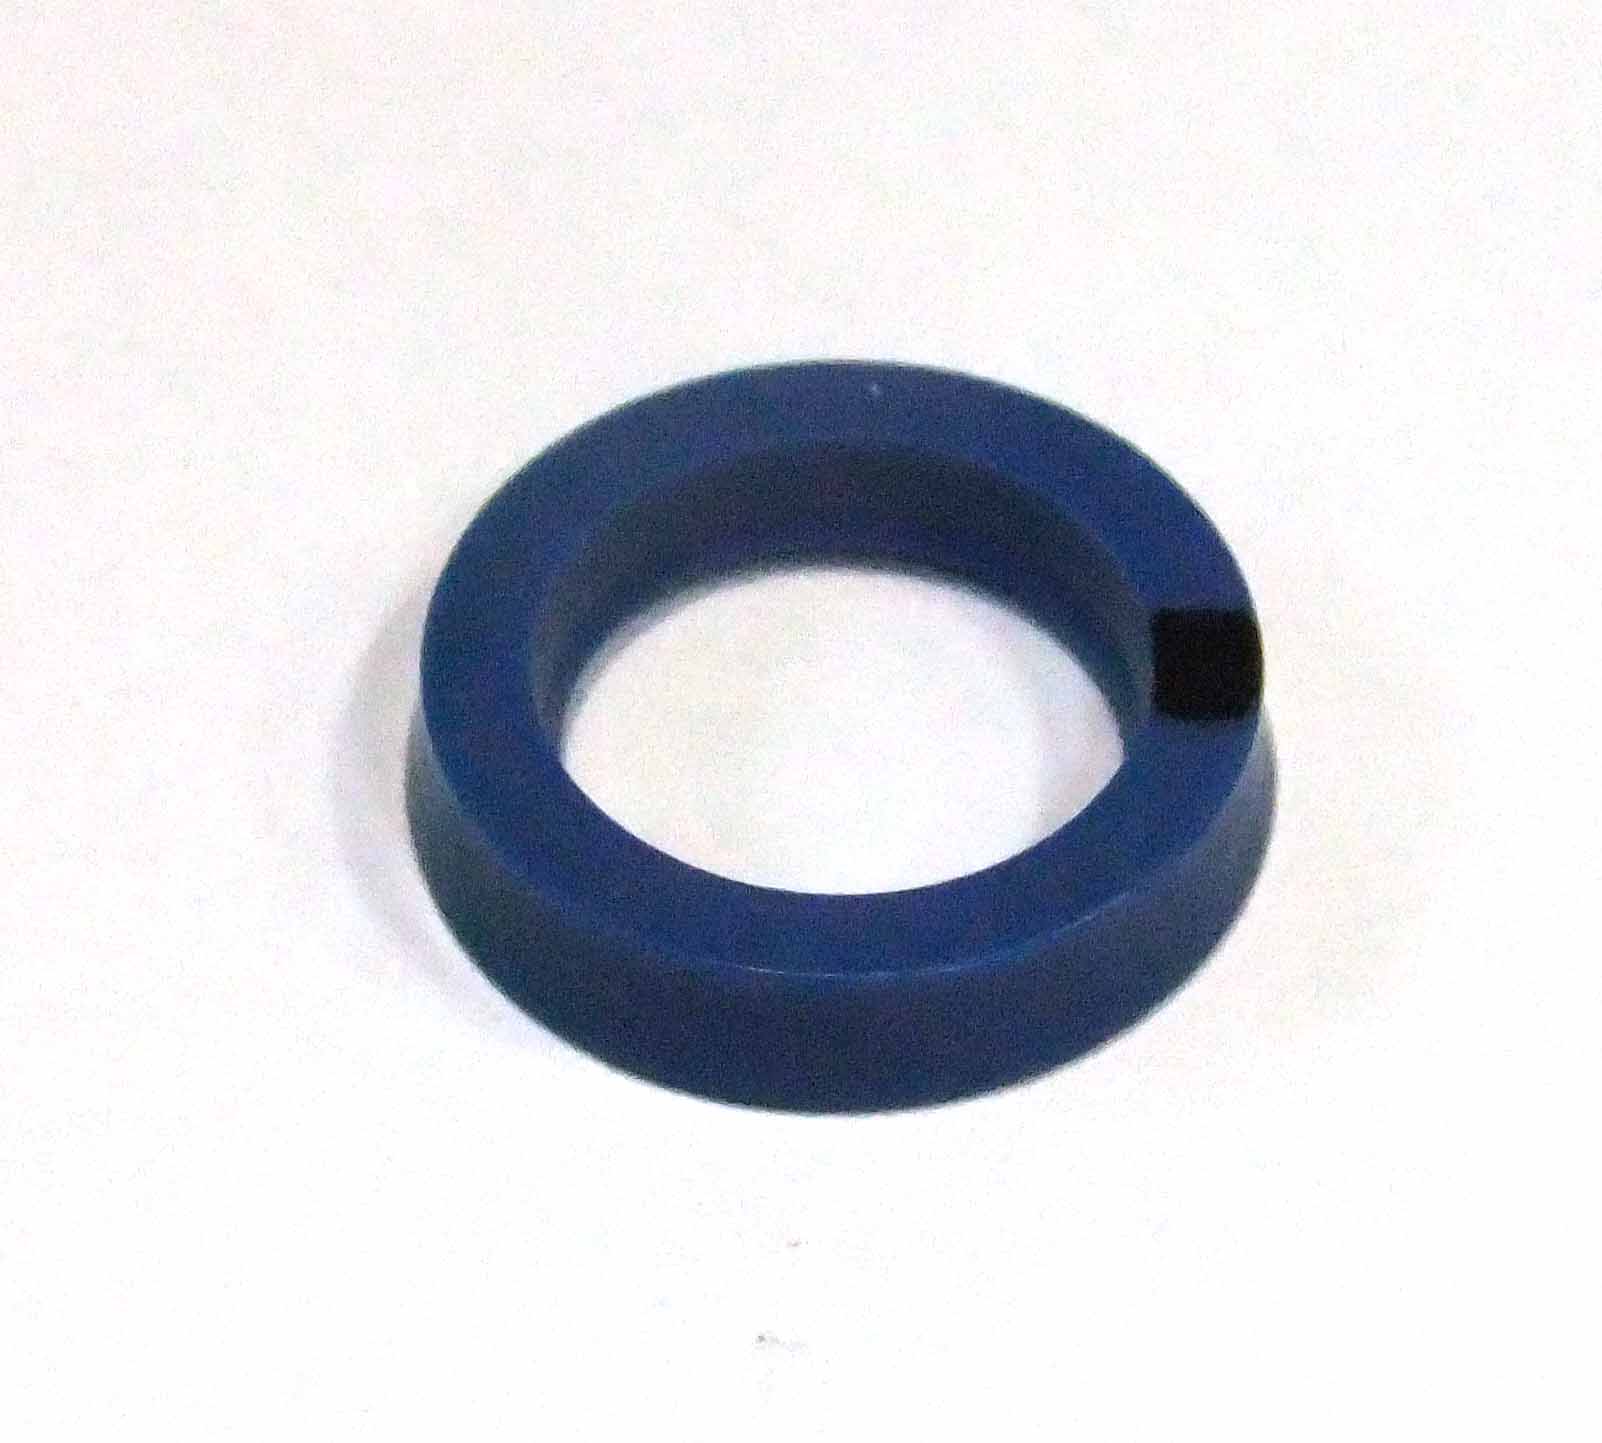 SEALING RING OF THE PISTON ROD/SHAFT. SUITABLE FOR CLOSED-CARTRIDGE FORKS SHOWA 12 X 18 X 3,5 MM 1 PIECE